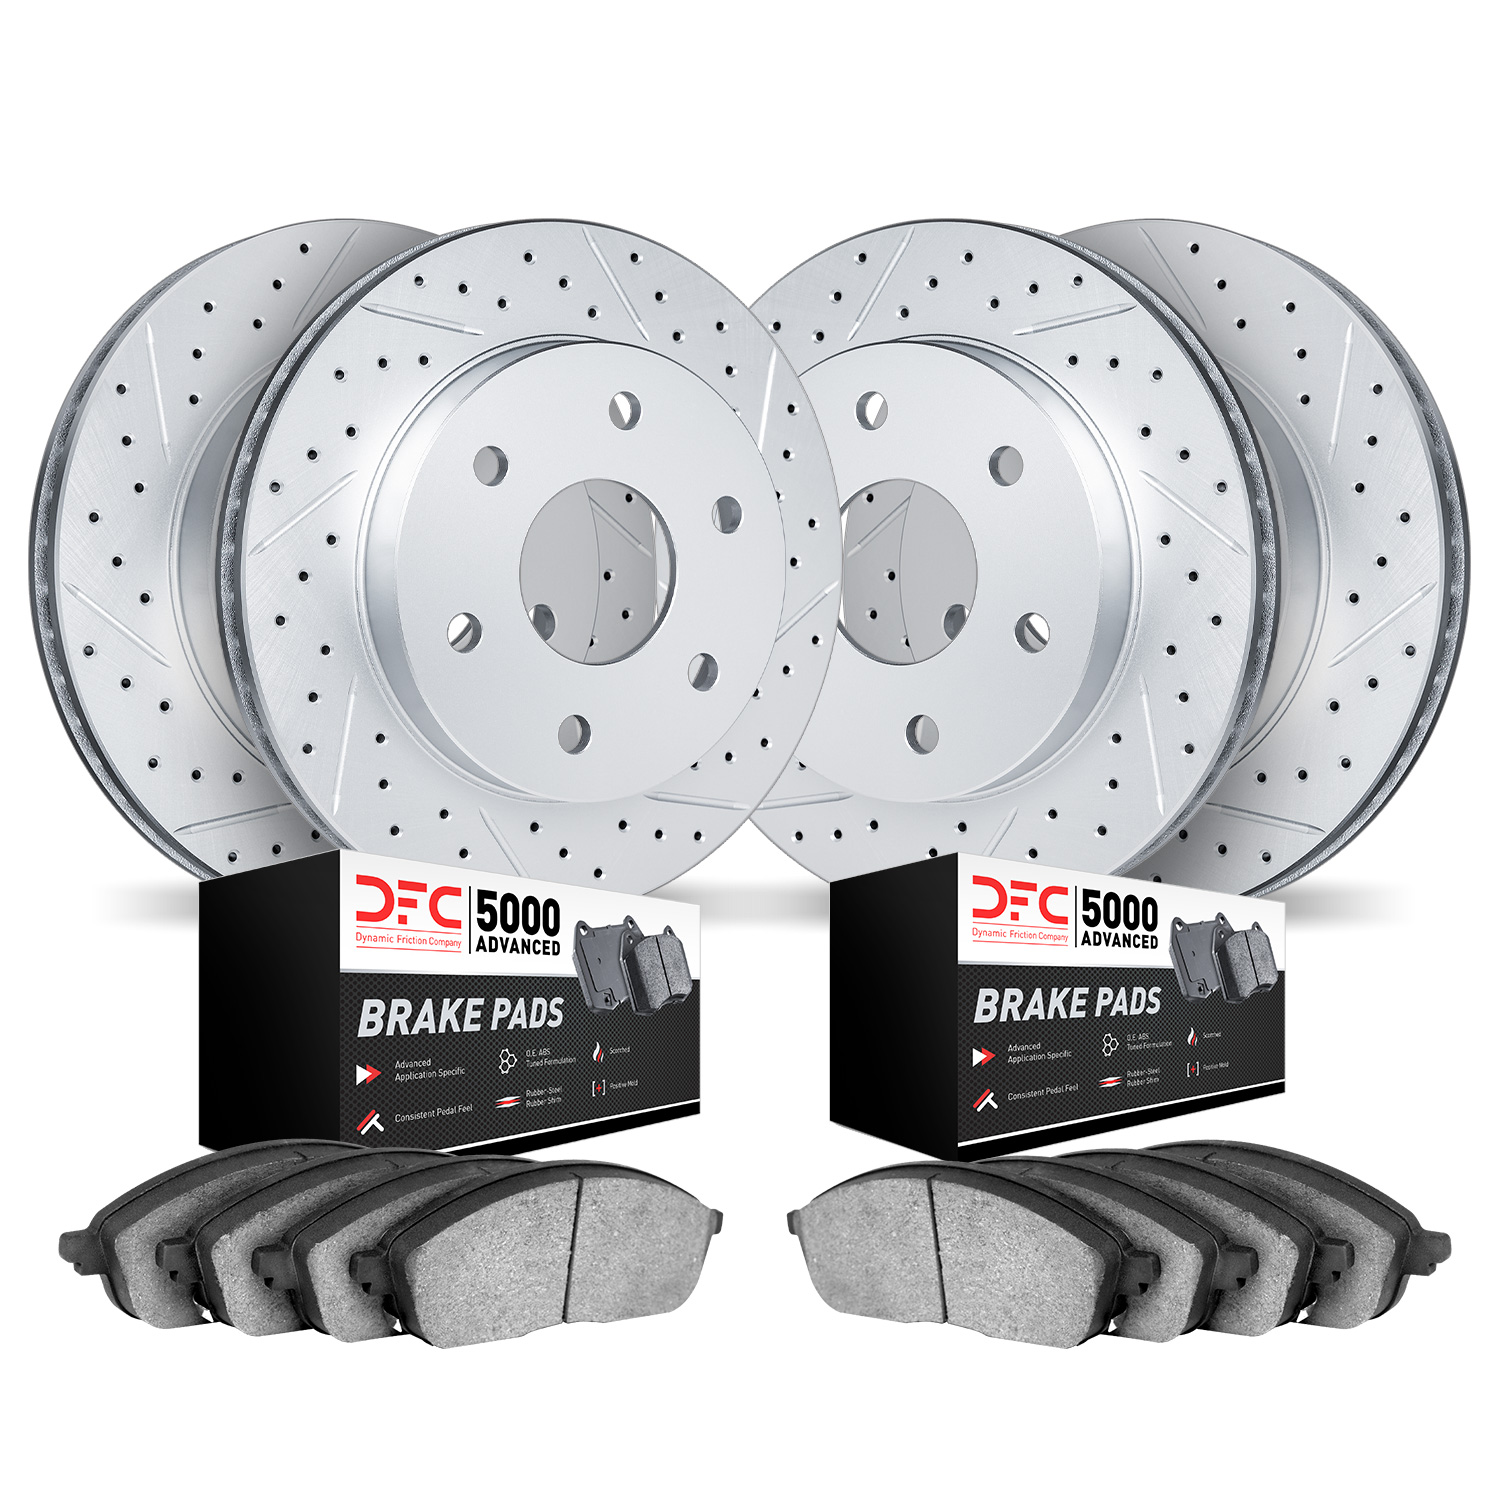 2504-46028 Geoperformance Drilled/Slotted Rotors w/5000 Advanced Brake Pads Kit, 2013-2019 GM, Position: Front and Rear